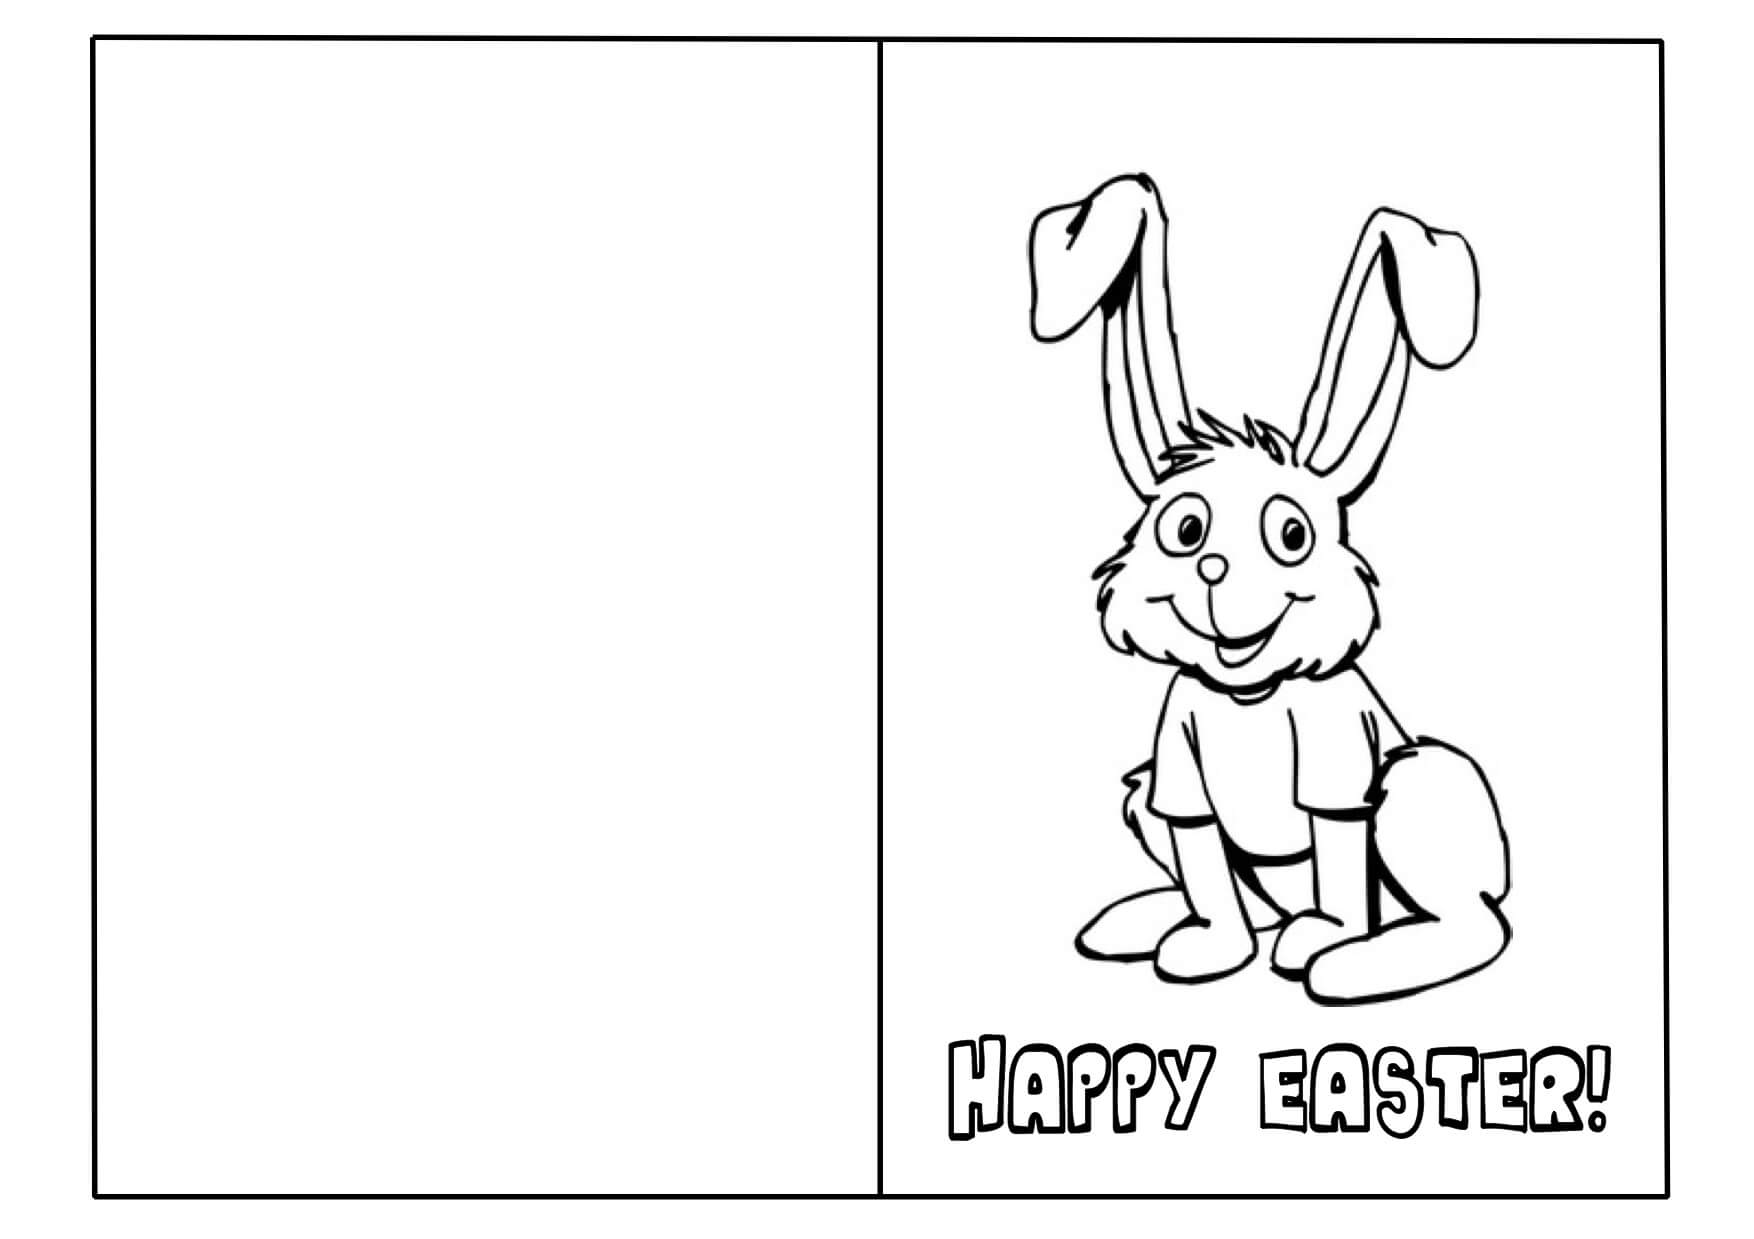 Easter Card Template Ks2 1 – Happy Easter Sunday In Easter Card Template Ks2